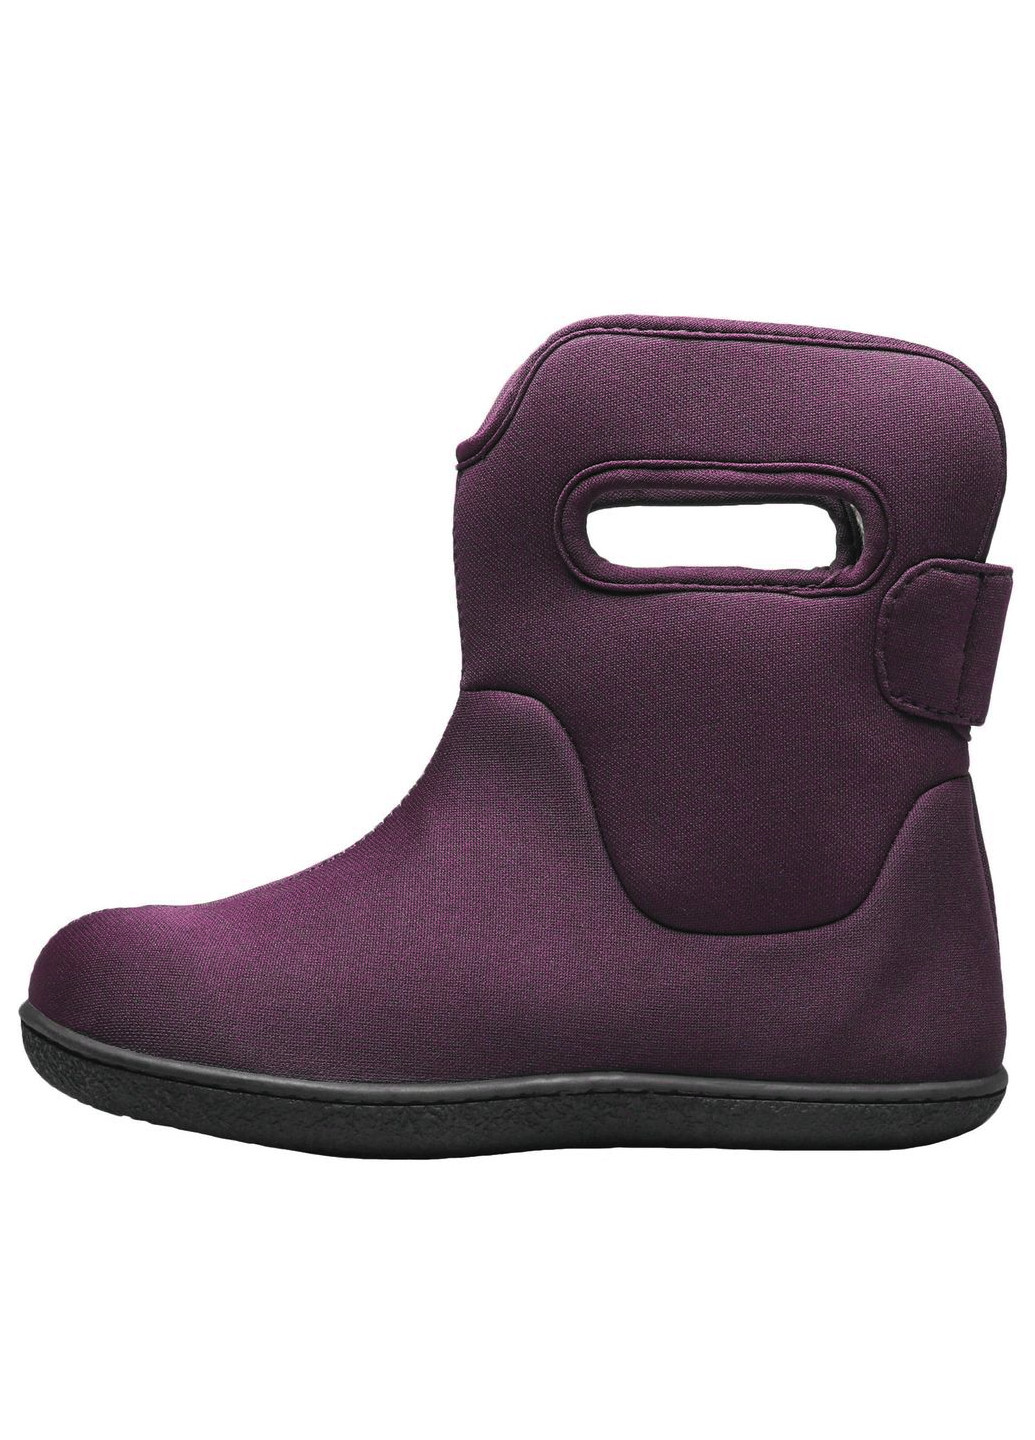 Сапожки детские Bogs youngster solid plum (277943083)